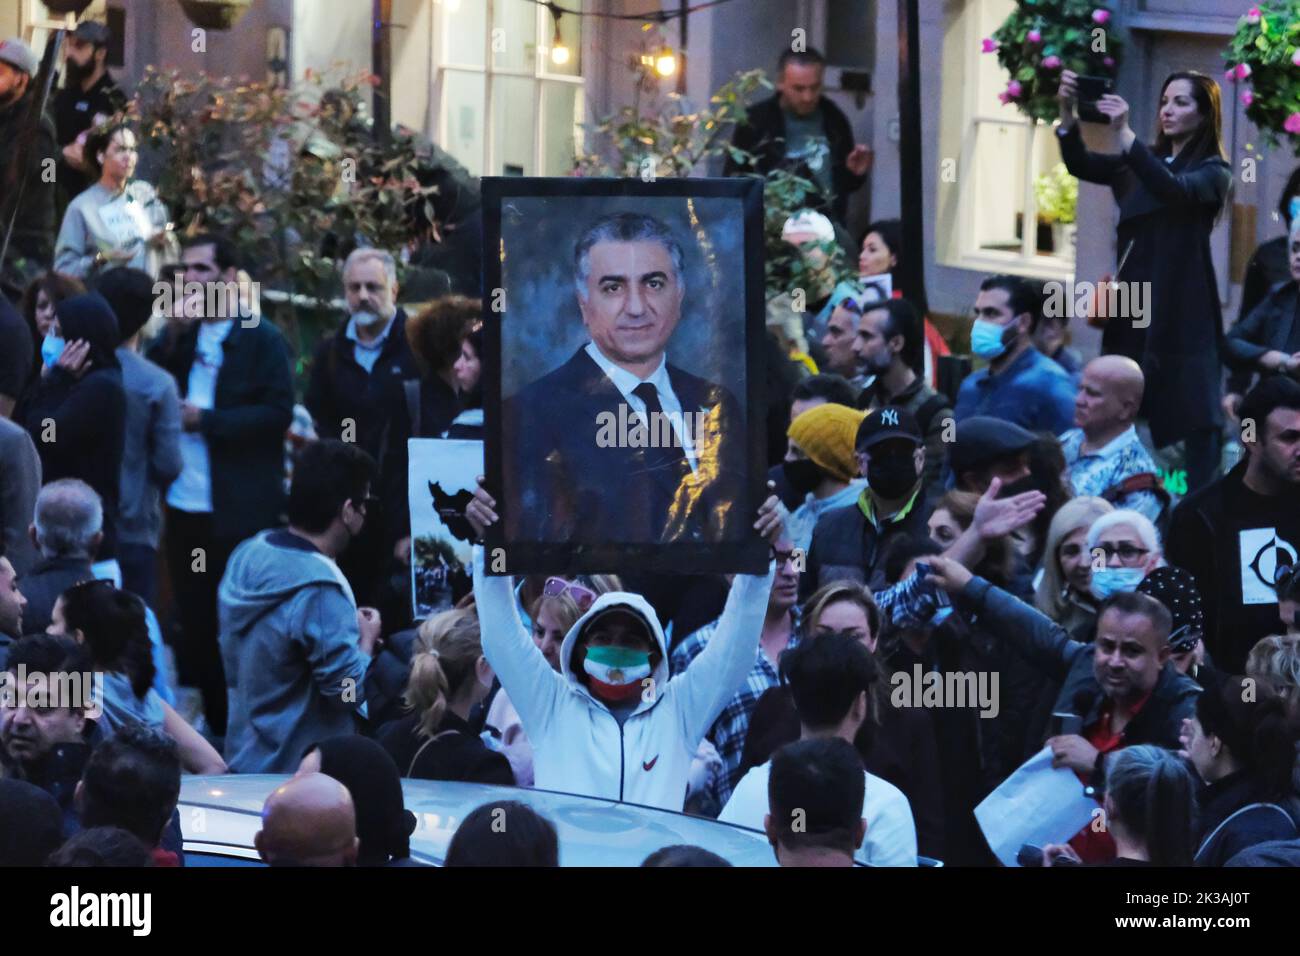 London, UK. 25th September, 2022. A man holds up a portrait of the Shah of Iran. Hundreds of British-Iranians continued their protest after a 22-year-old Kurdish woman Mahsa Amini detained by the nation's morality police for wearing her hijab incorrectly, died in custody. A demonstration that begun outside the Iranian Embassy moved to the Islamic Centre of England who is run by the UK representative of Ayotollah Khamenei. Riot police were drafted in to disperse the crowd after disorder broke out. Credit: Eleventh Hour Photography/Alamy Live News Stock Photo